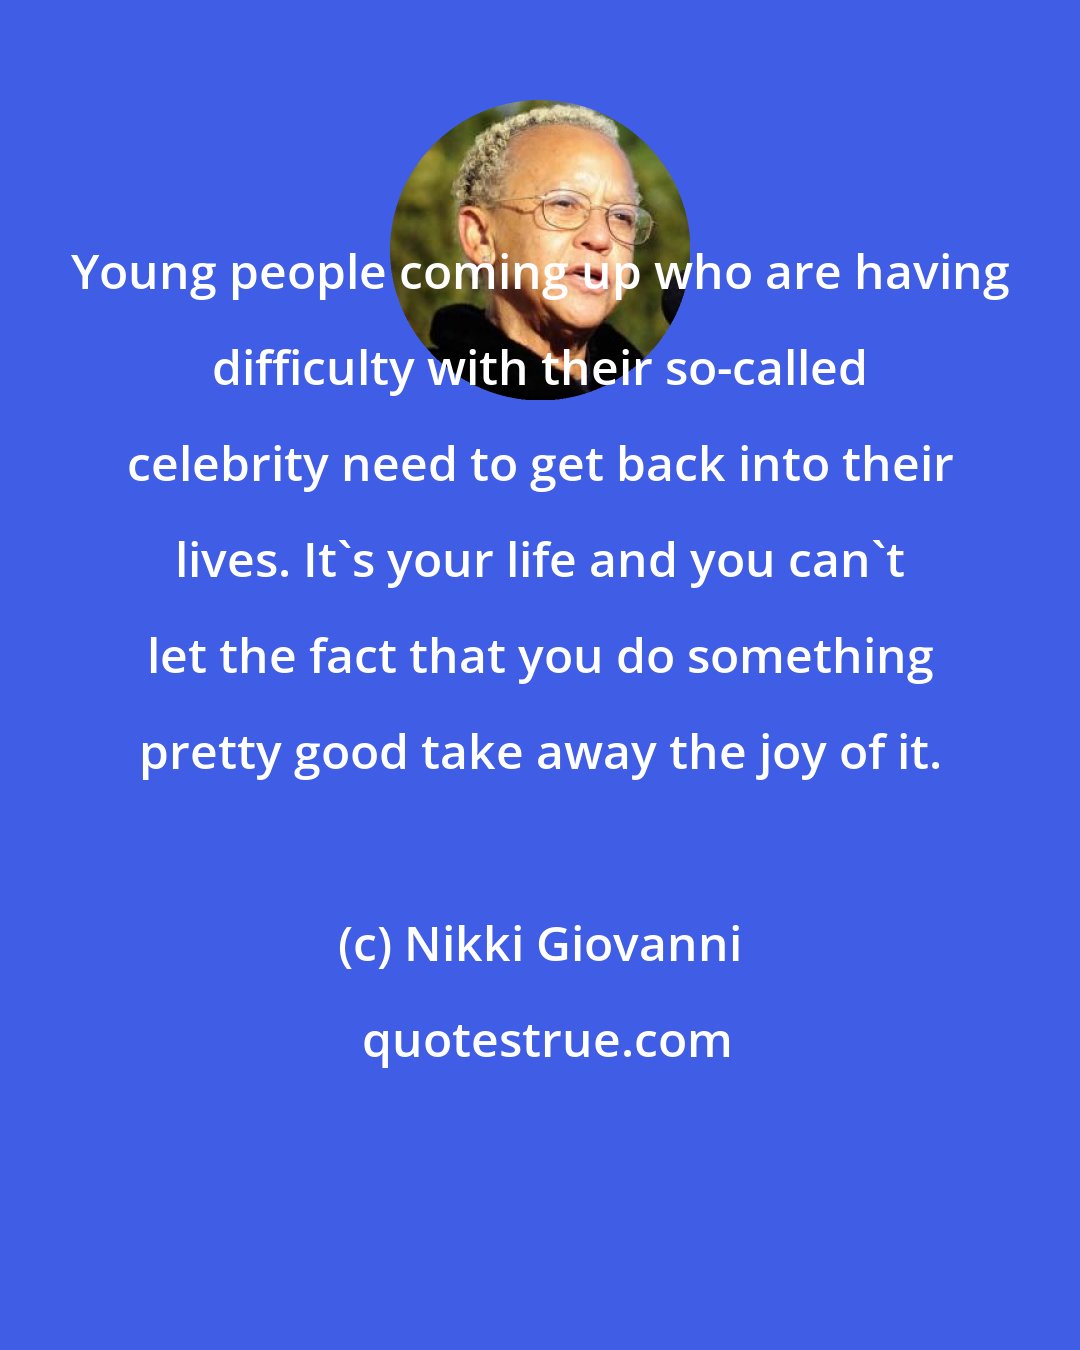 Nikki Giovanni: Young people coming up who are having difficulty with their so-called celebrity need to get back into their lives. It's your life and you can't let the fact that you do something pretty good take away the joy of it.